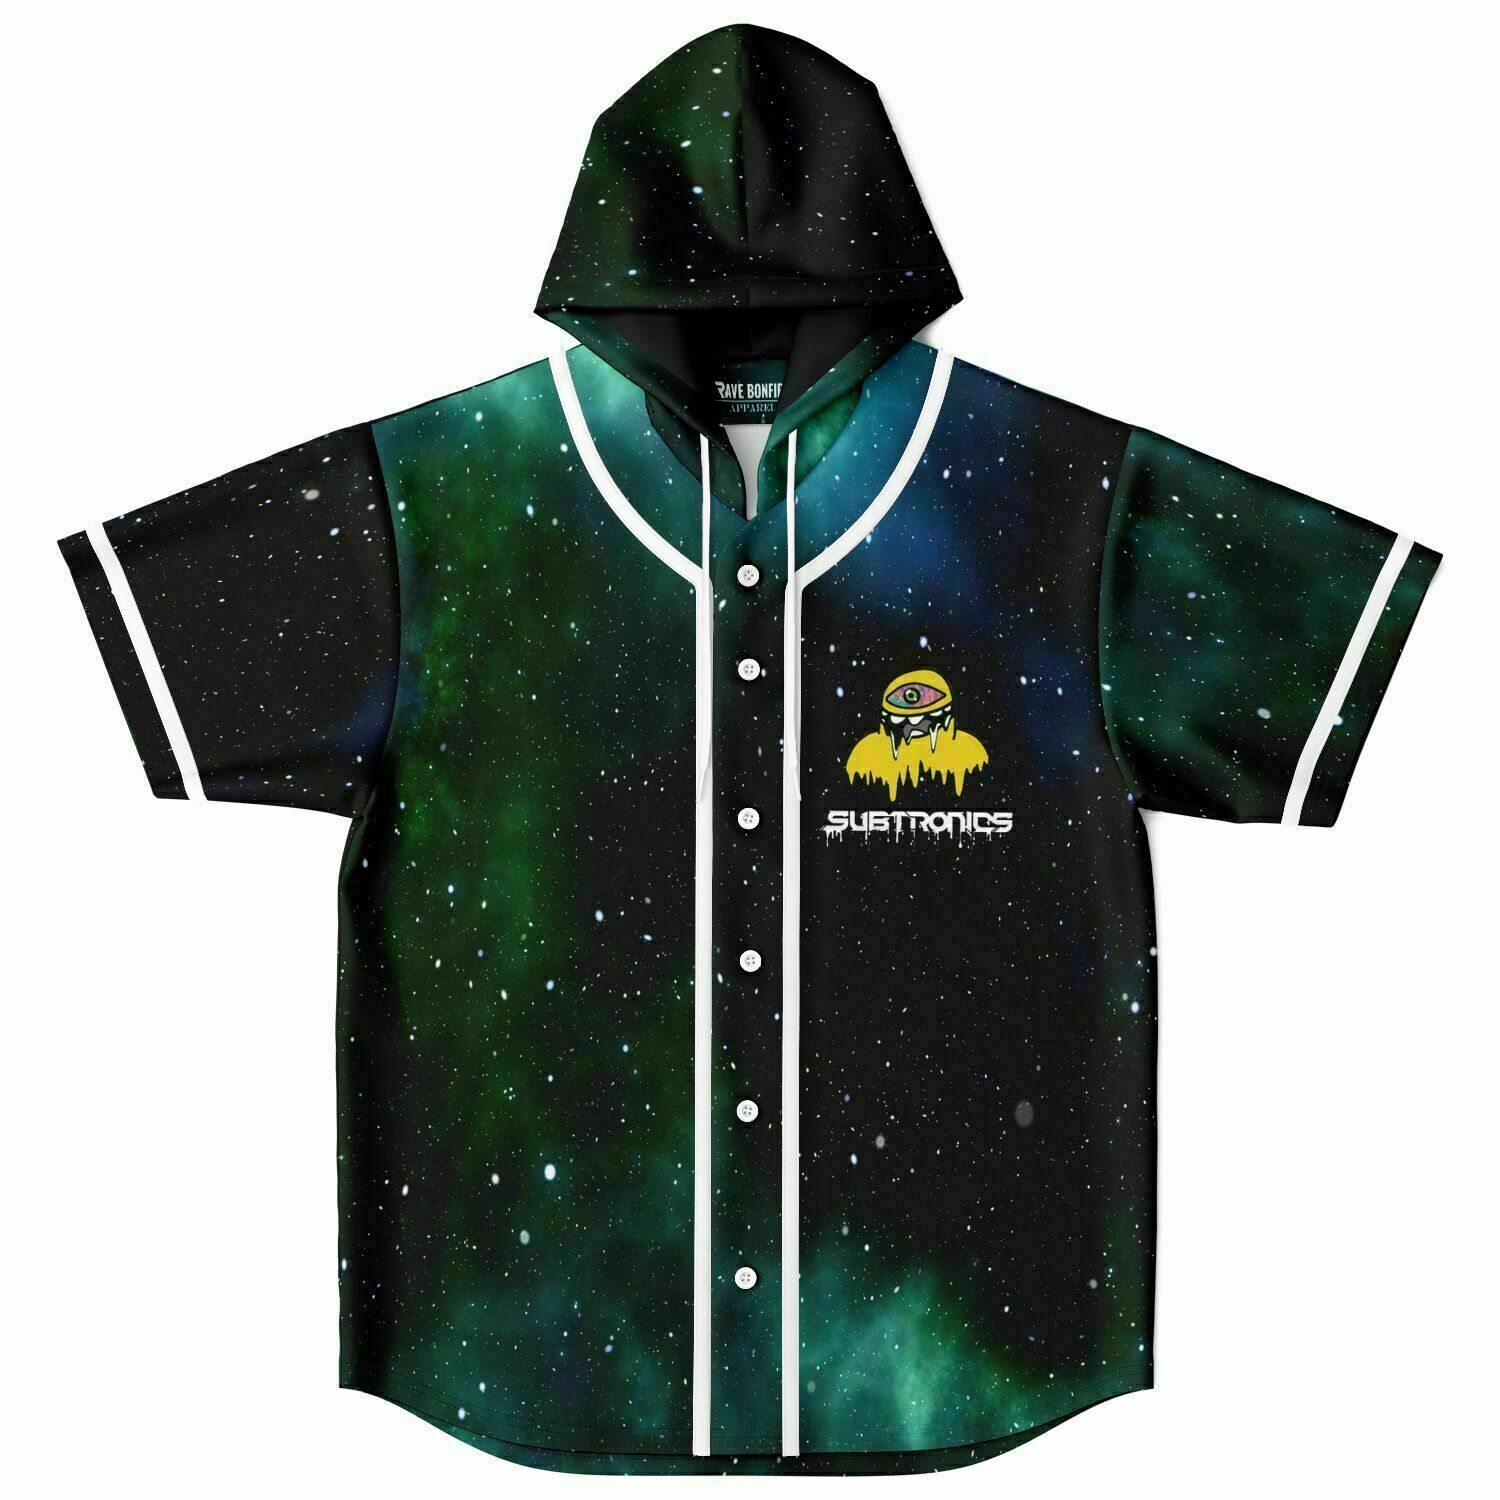 A custom galaxy subtronics hooded jersey with a galaxy print on it.